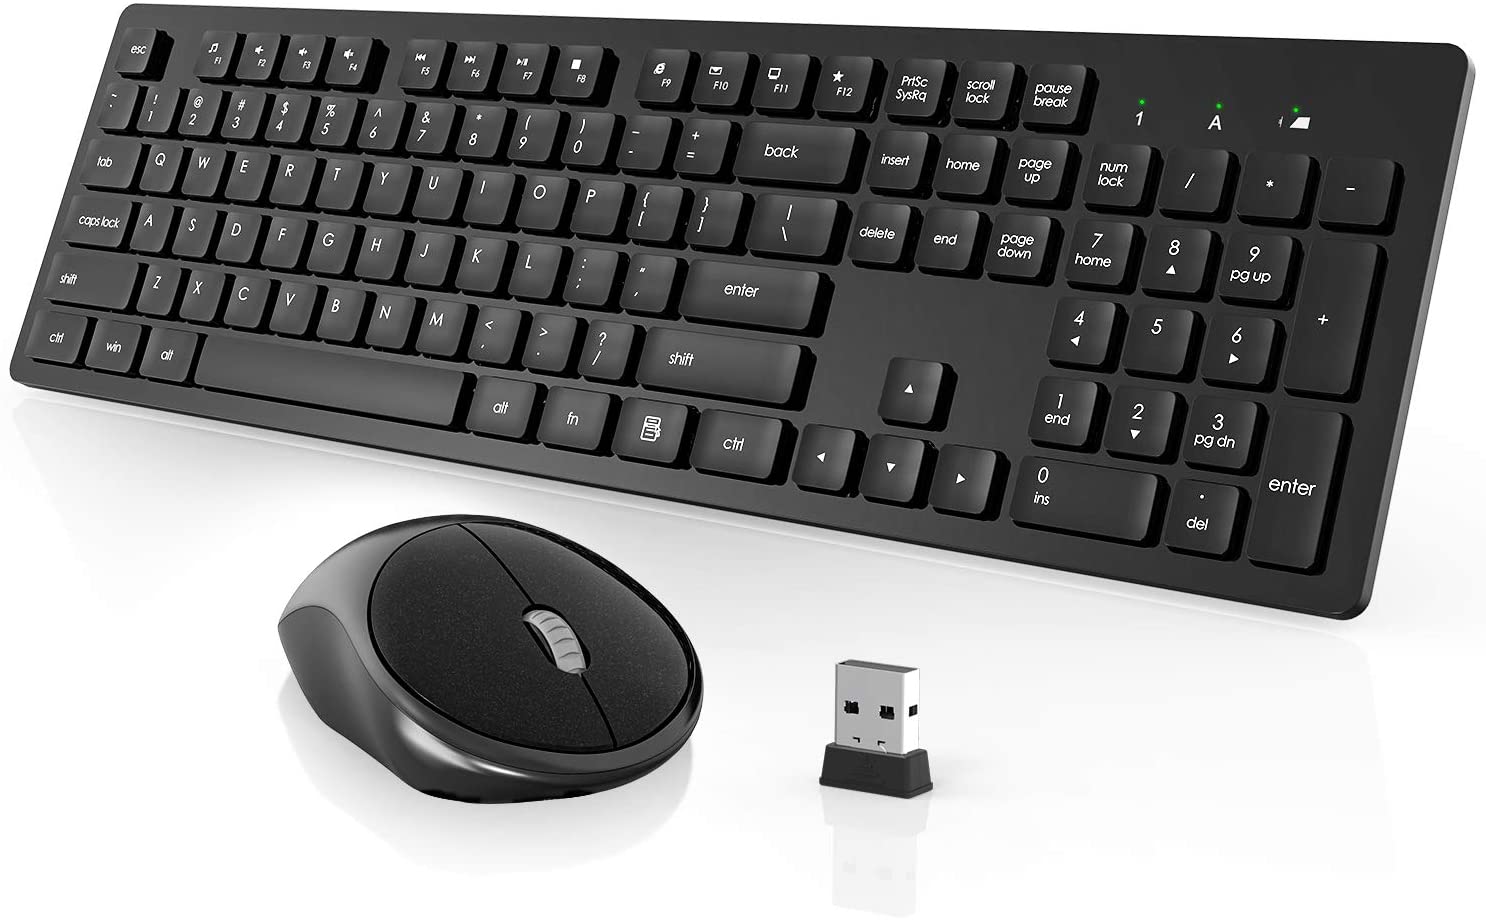 Best Wireless Keyboard and Mouse Combo for Laptop - March 2021